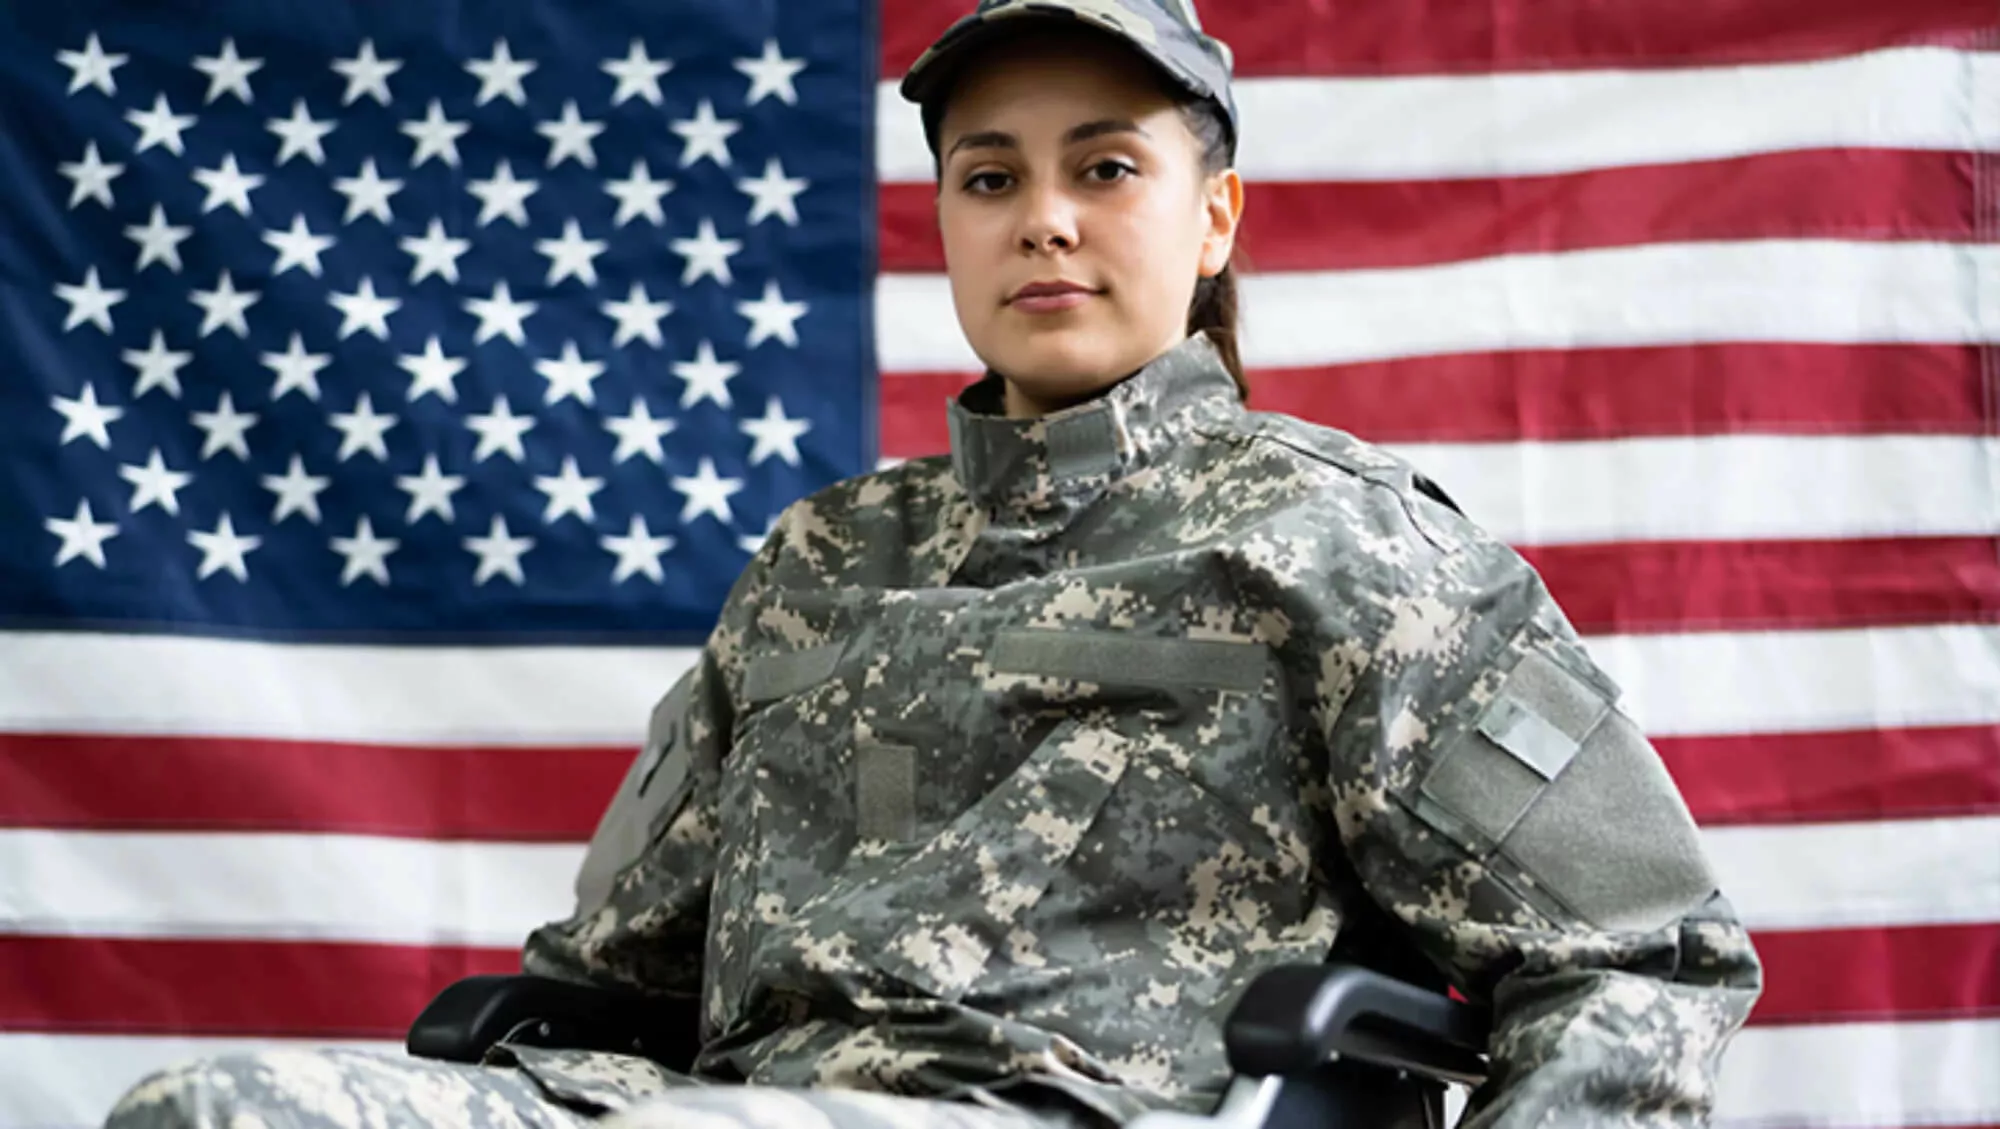 Female veteran in uniform in a wheelchair in front of the American flag.